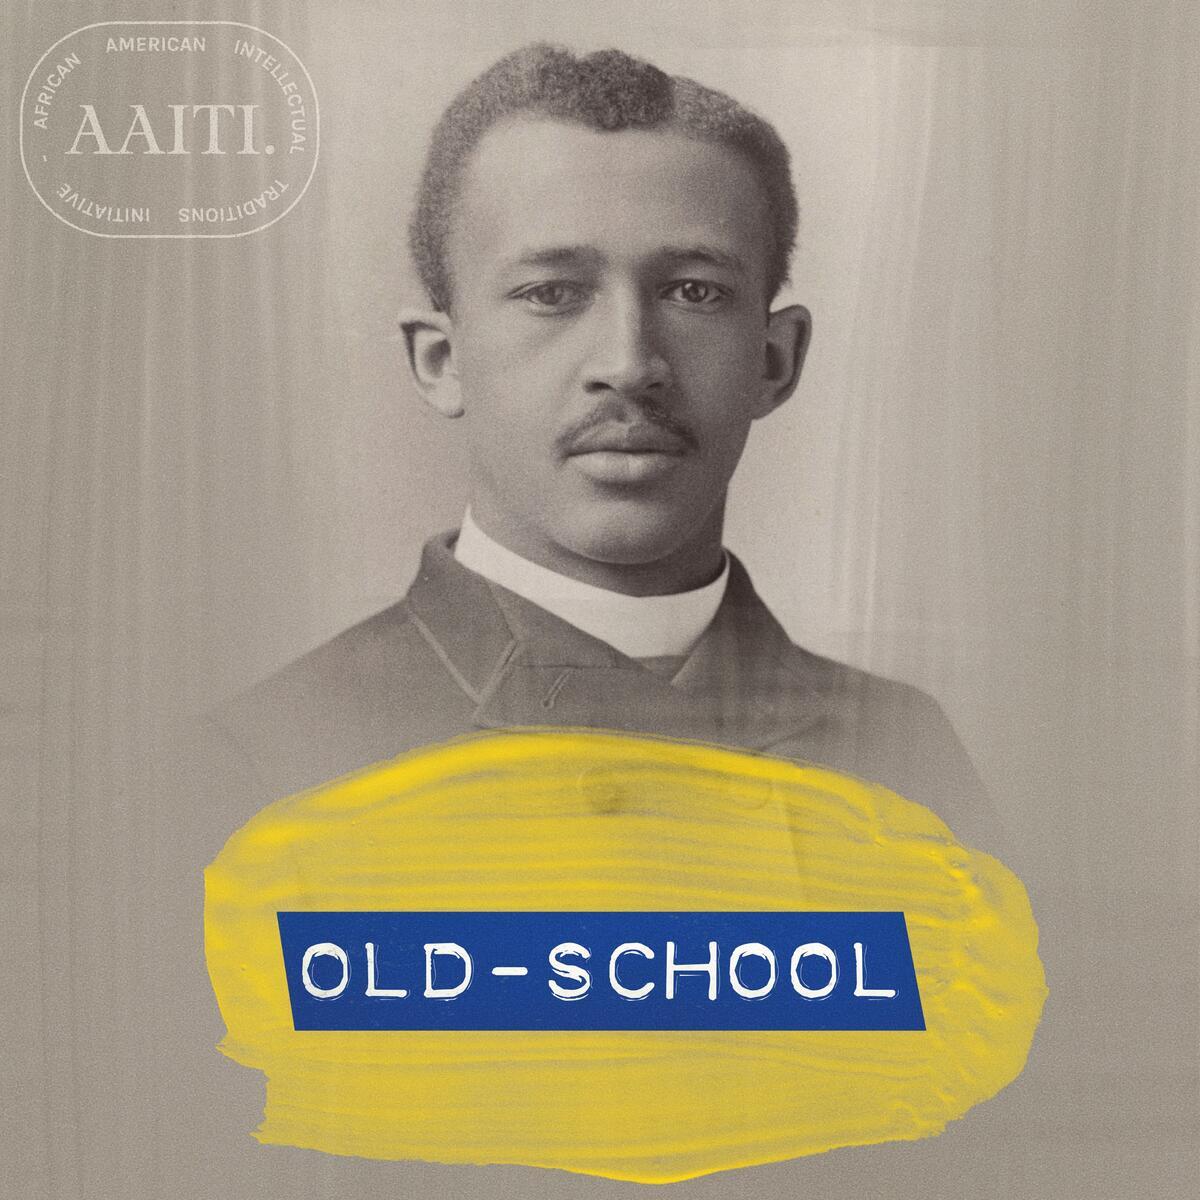 W. E. B. Du Bois college graduation photo with added yellow paint and "Old-School" podcast title